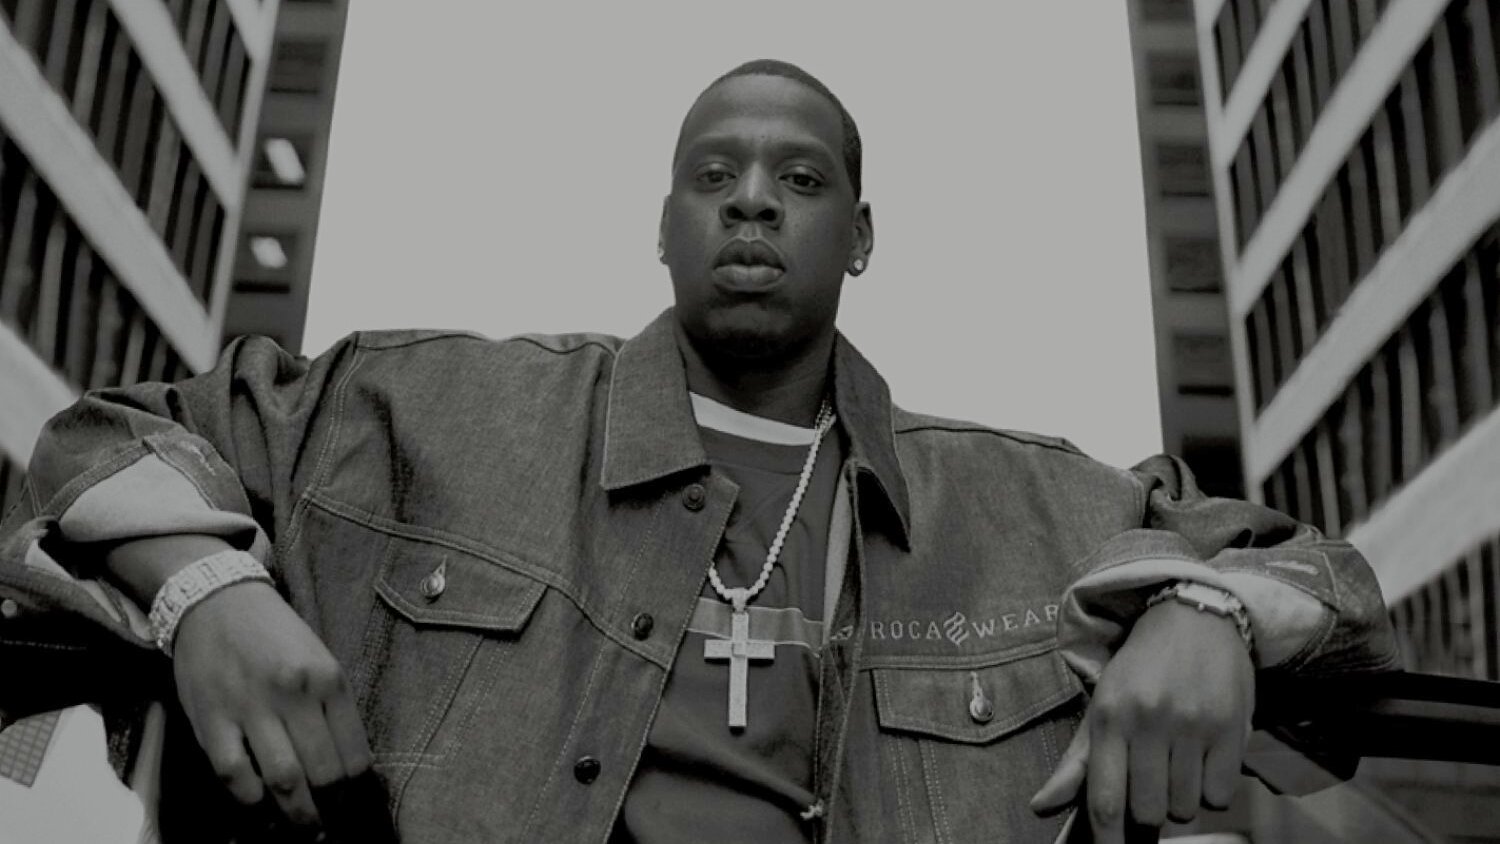 JAY-Z, Biography, Songs, Empire State of Mind, Beyonce, & Facts